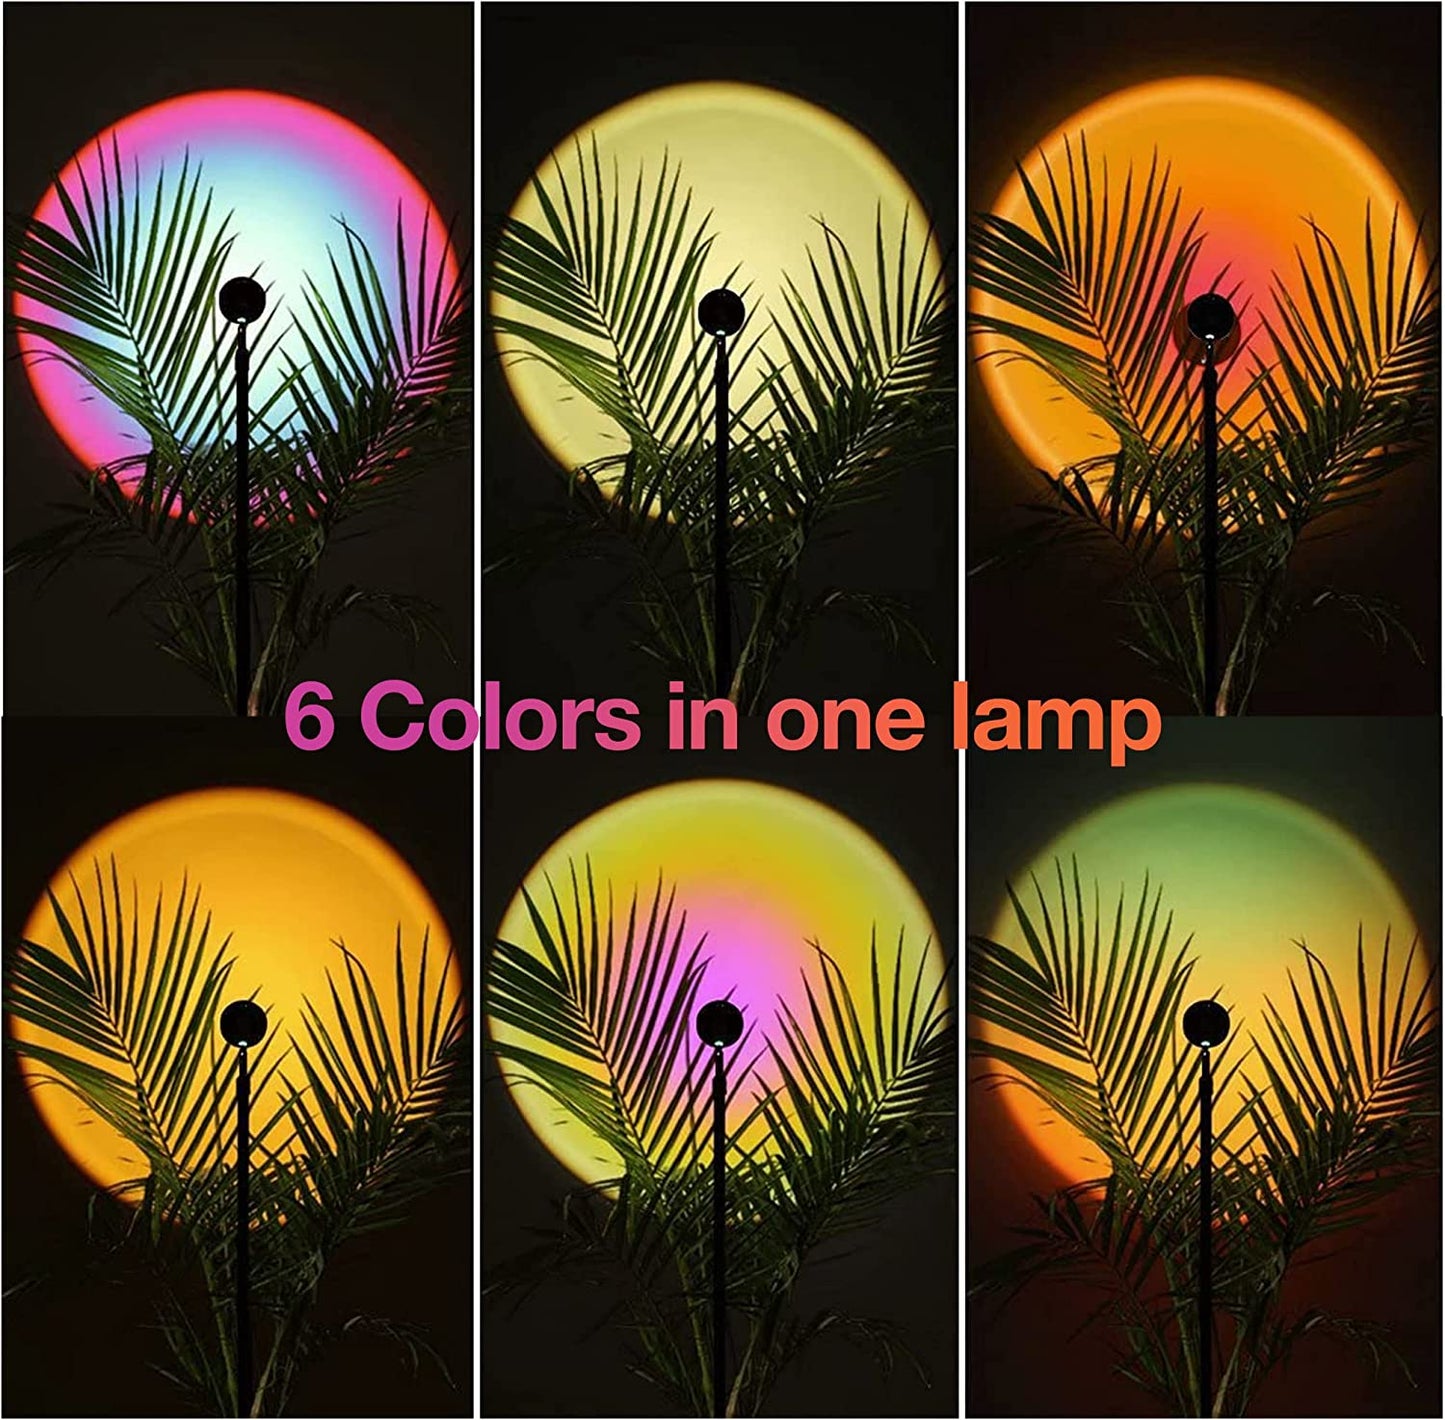 Sunset Lamp Projection, Sun Lamp, Sunlight Lamp Projector, Manual Control Light Projector, Golden Hour 4 Filter 6 Color Changing Night Light for Sunset Projection Lamp, Photography/Party/Home/Bedroom